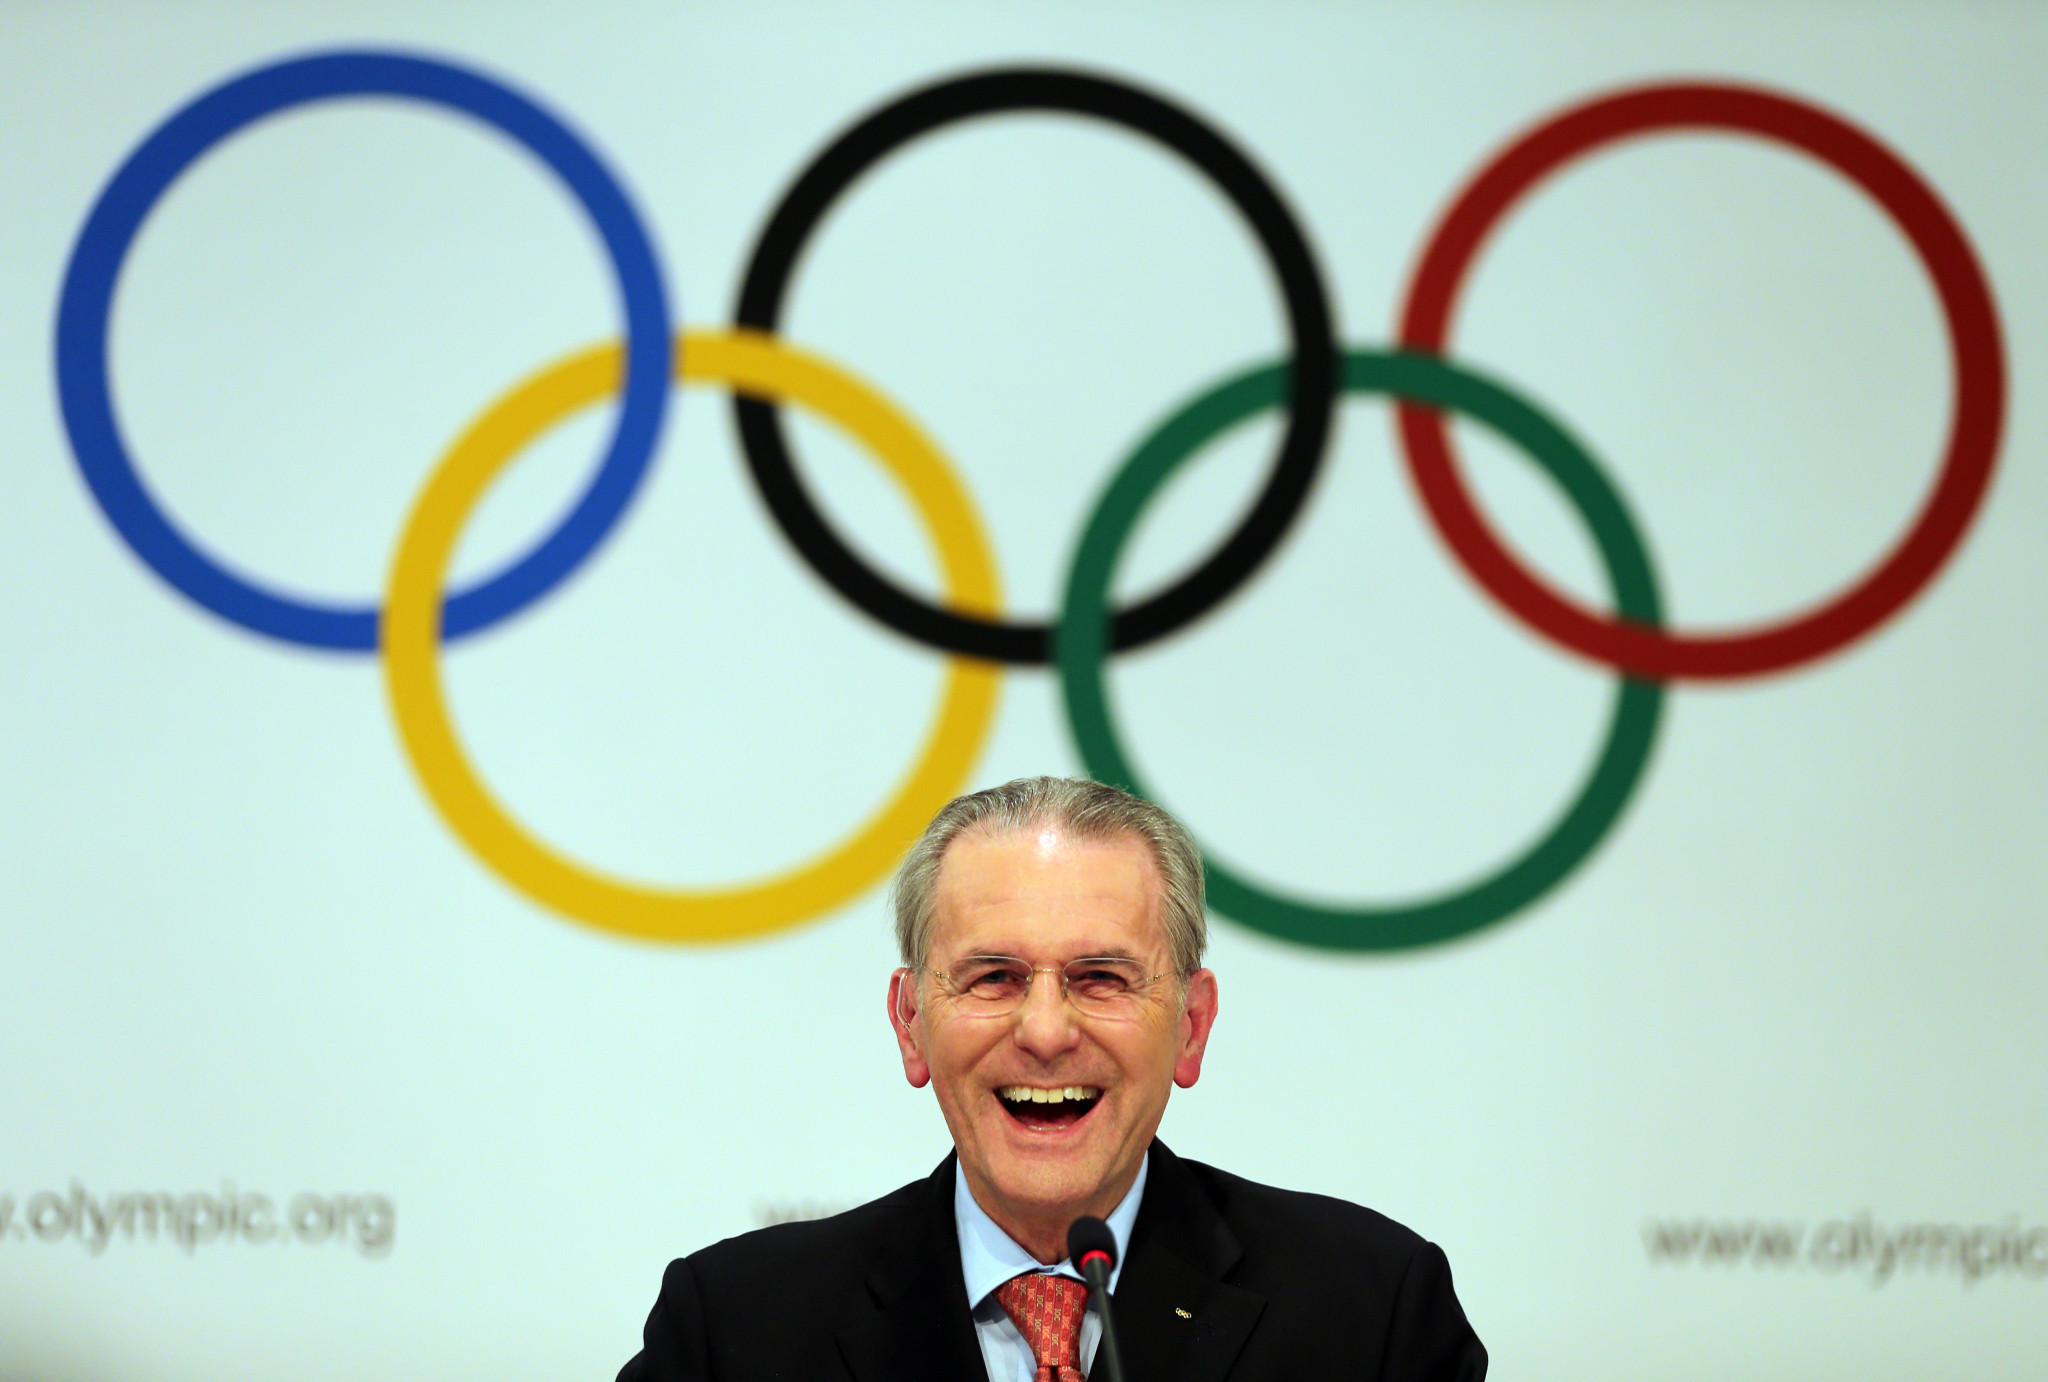 Former IOC President Jacques Rogge "inspired us as sports leaders", says FITEQ